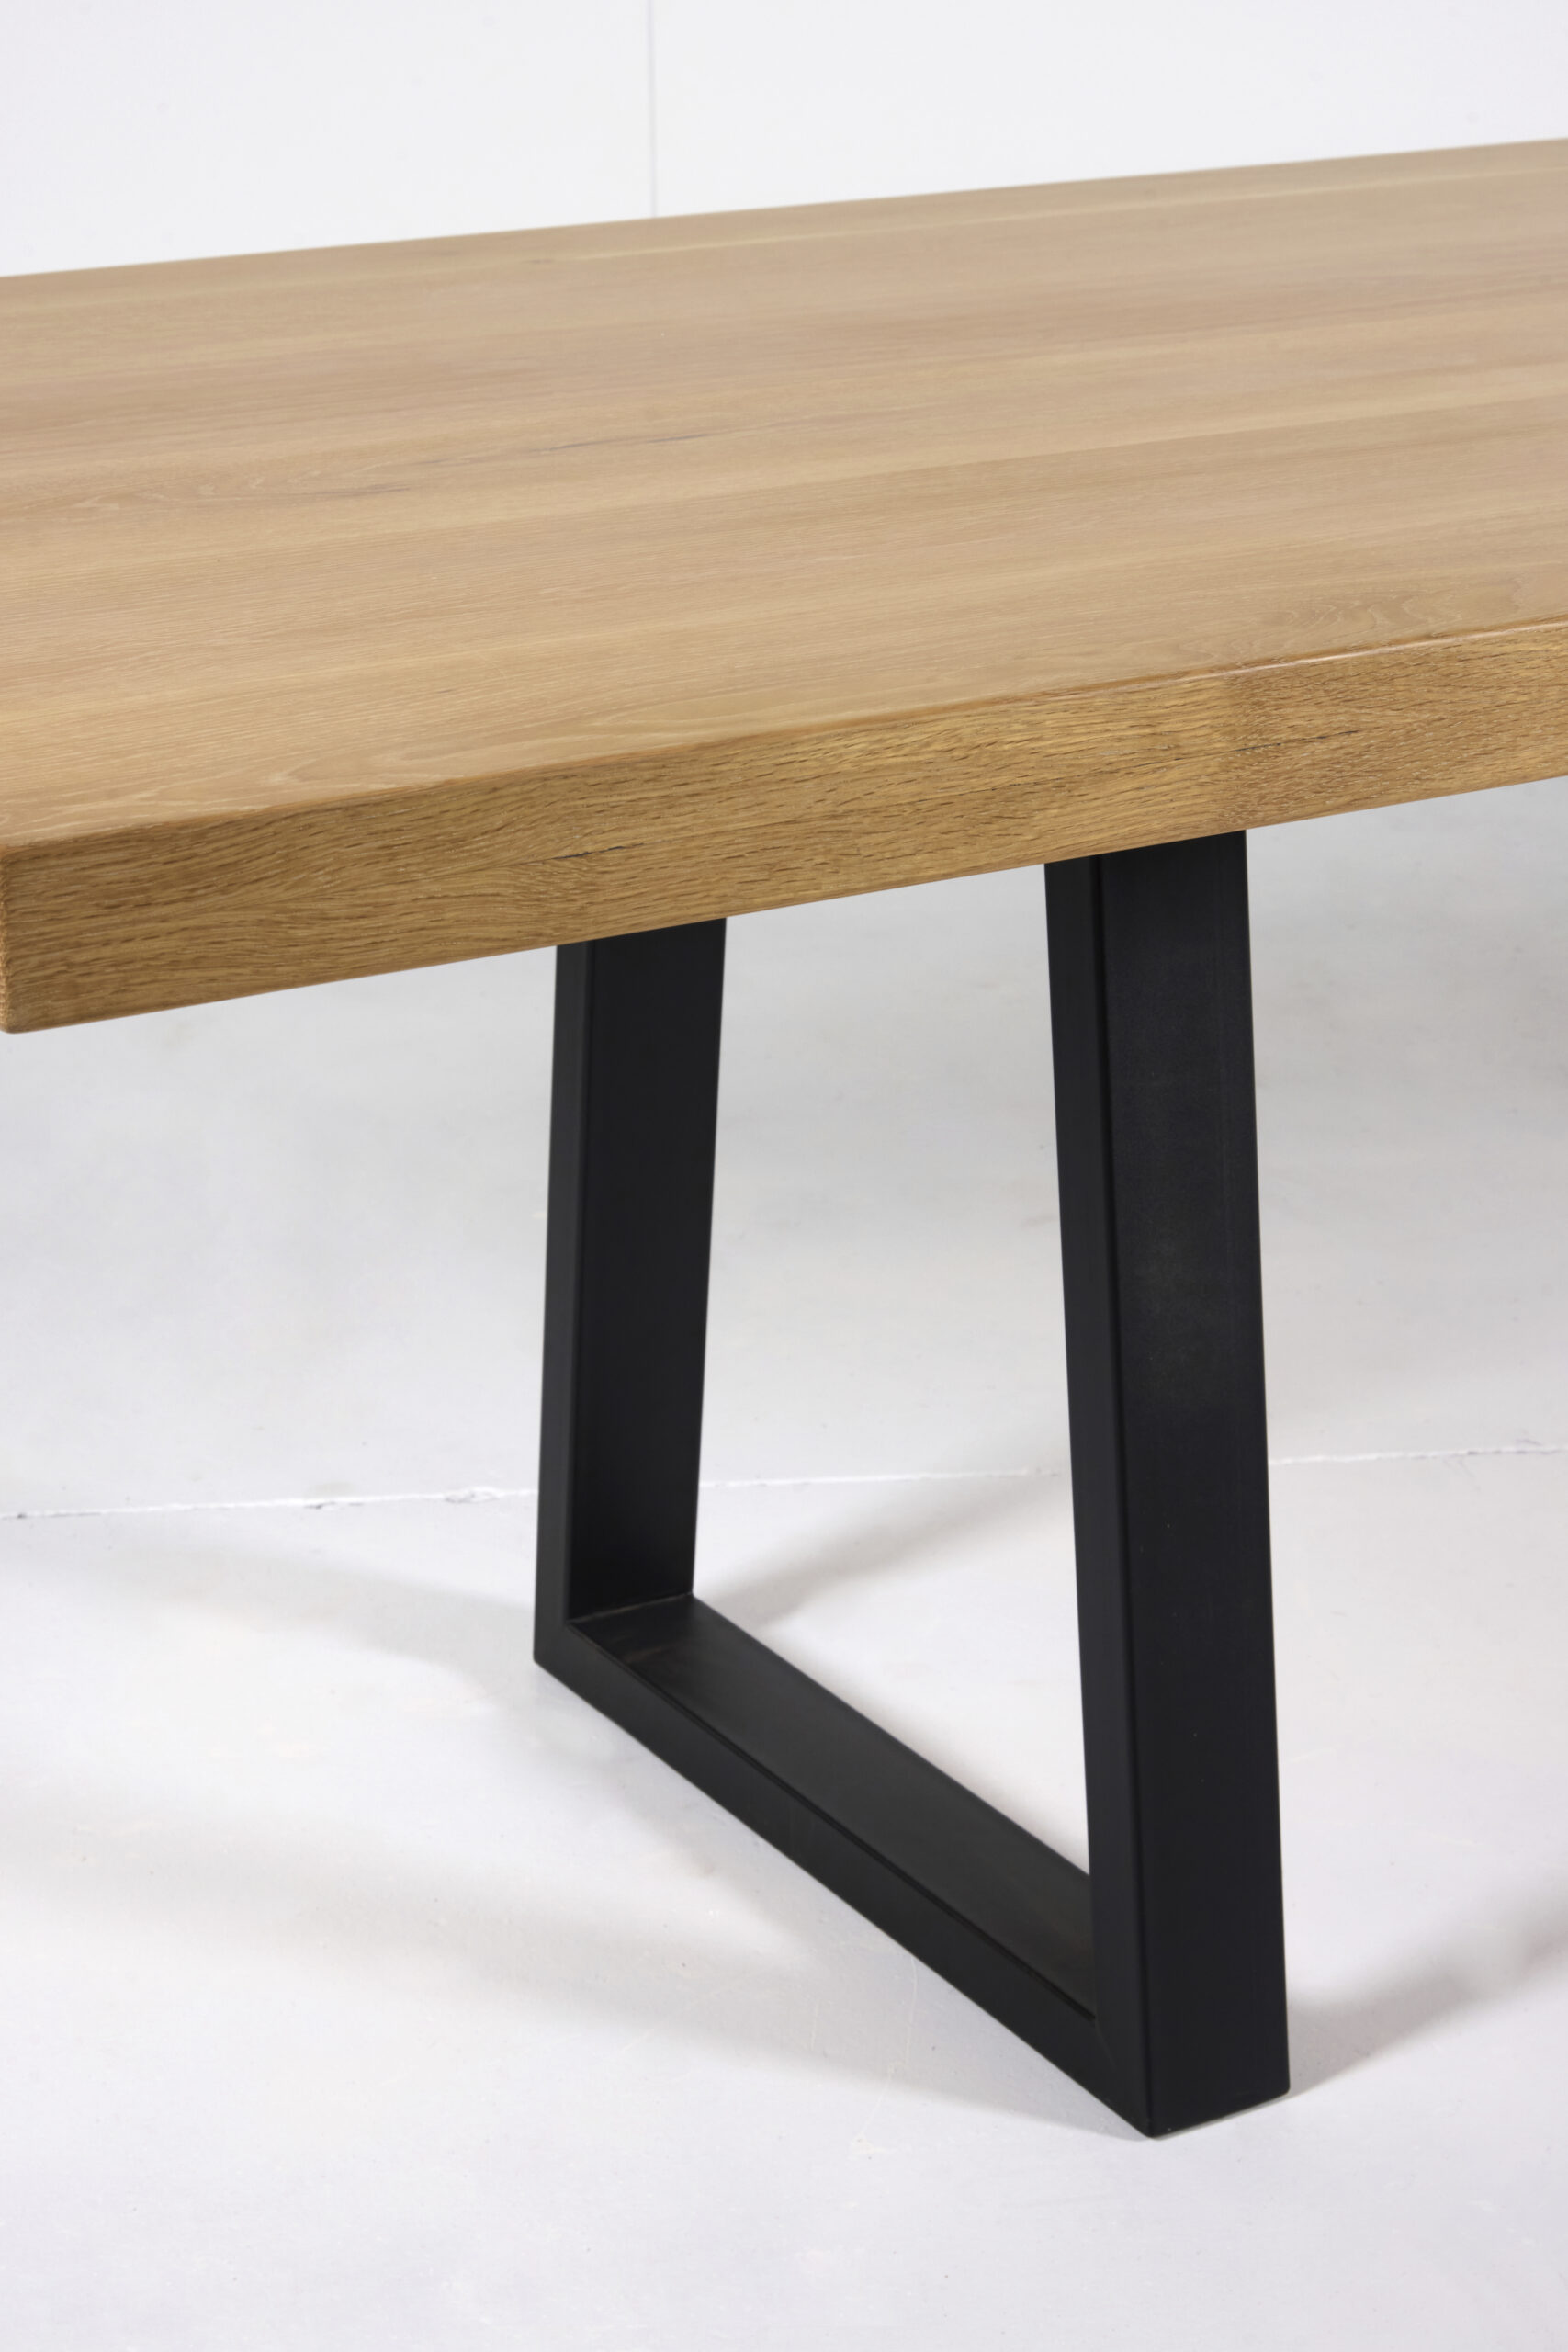 Image of Noosa Dining Table by Arranmore Furniture, showcasing its sleek U or Klein Leg design in a modern dining setting.